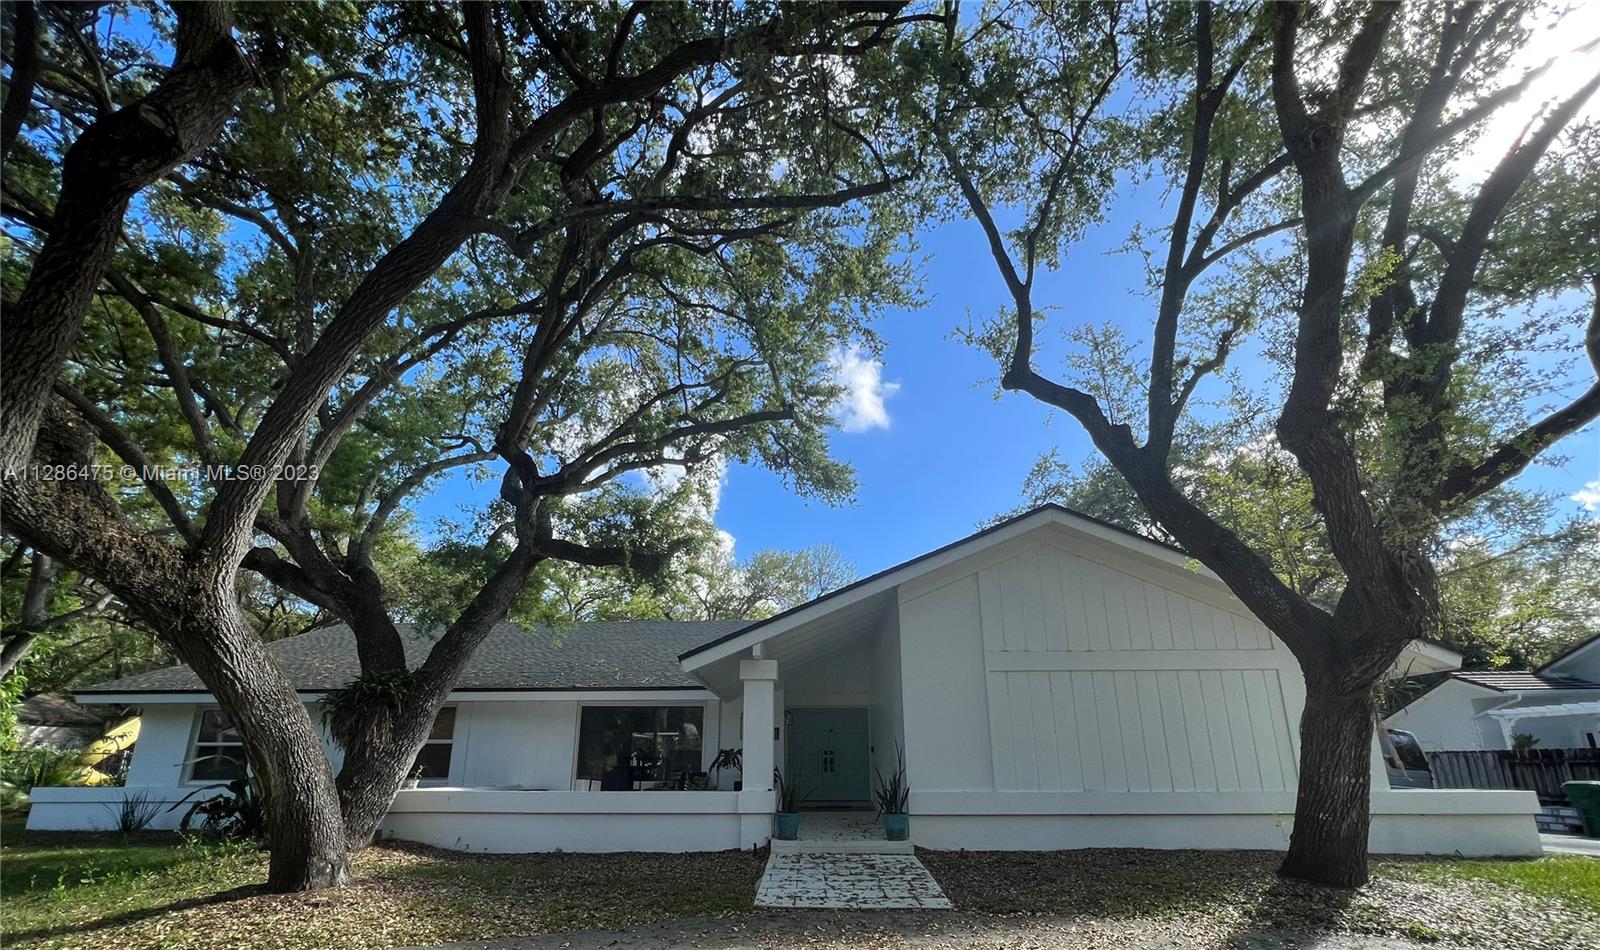 The best that Palmetto Bay has to offer! Won't last, this gorgeous 4/2/1 Modern Ranch beauty is located on a quiet Oak tree laden street off of Old Cutler Rd, blocks from Deering Estate and People's dock. Recently updated features include: New Roof (2022) High Impact Windows & Slider Doors (2020). Front Porch is sizable and welcoming with picture window for added curb appeal. Volume and Vaulted ceilings are located throughout the home & master bedroom suite. The heart of the home, the kitchen is voluminous with large galley pantry, dual wall ovens and x-large bay window with pool view. Working fireplace in Family Room. Available RV or boat parking on either side of home, Black Point Marina w/in 8 miles. Large backyard equipped with custom Treehouse, shed, and playground area.